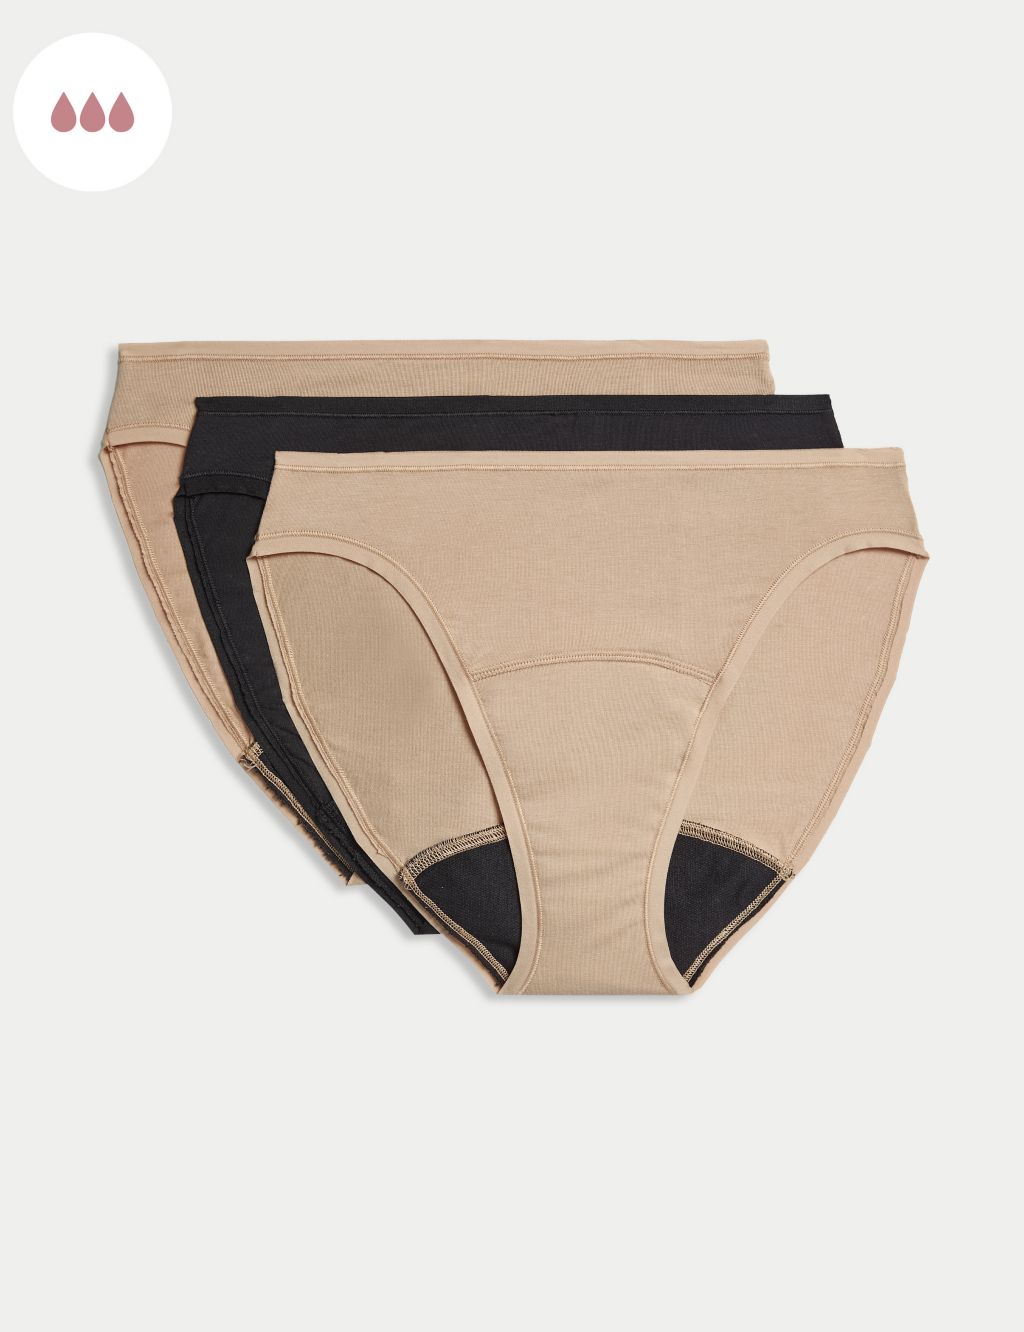 charlie stimpson recommends Young Nude Panties